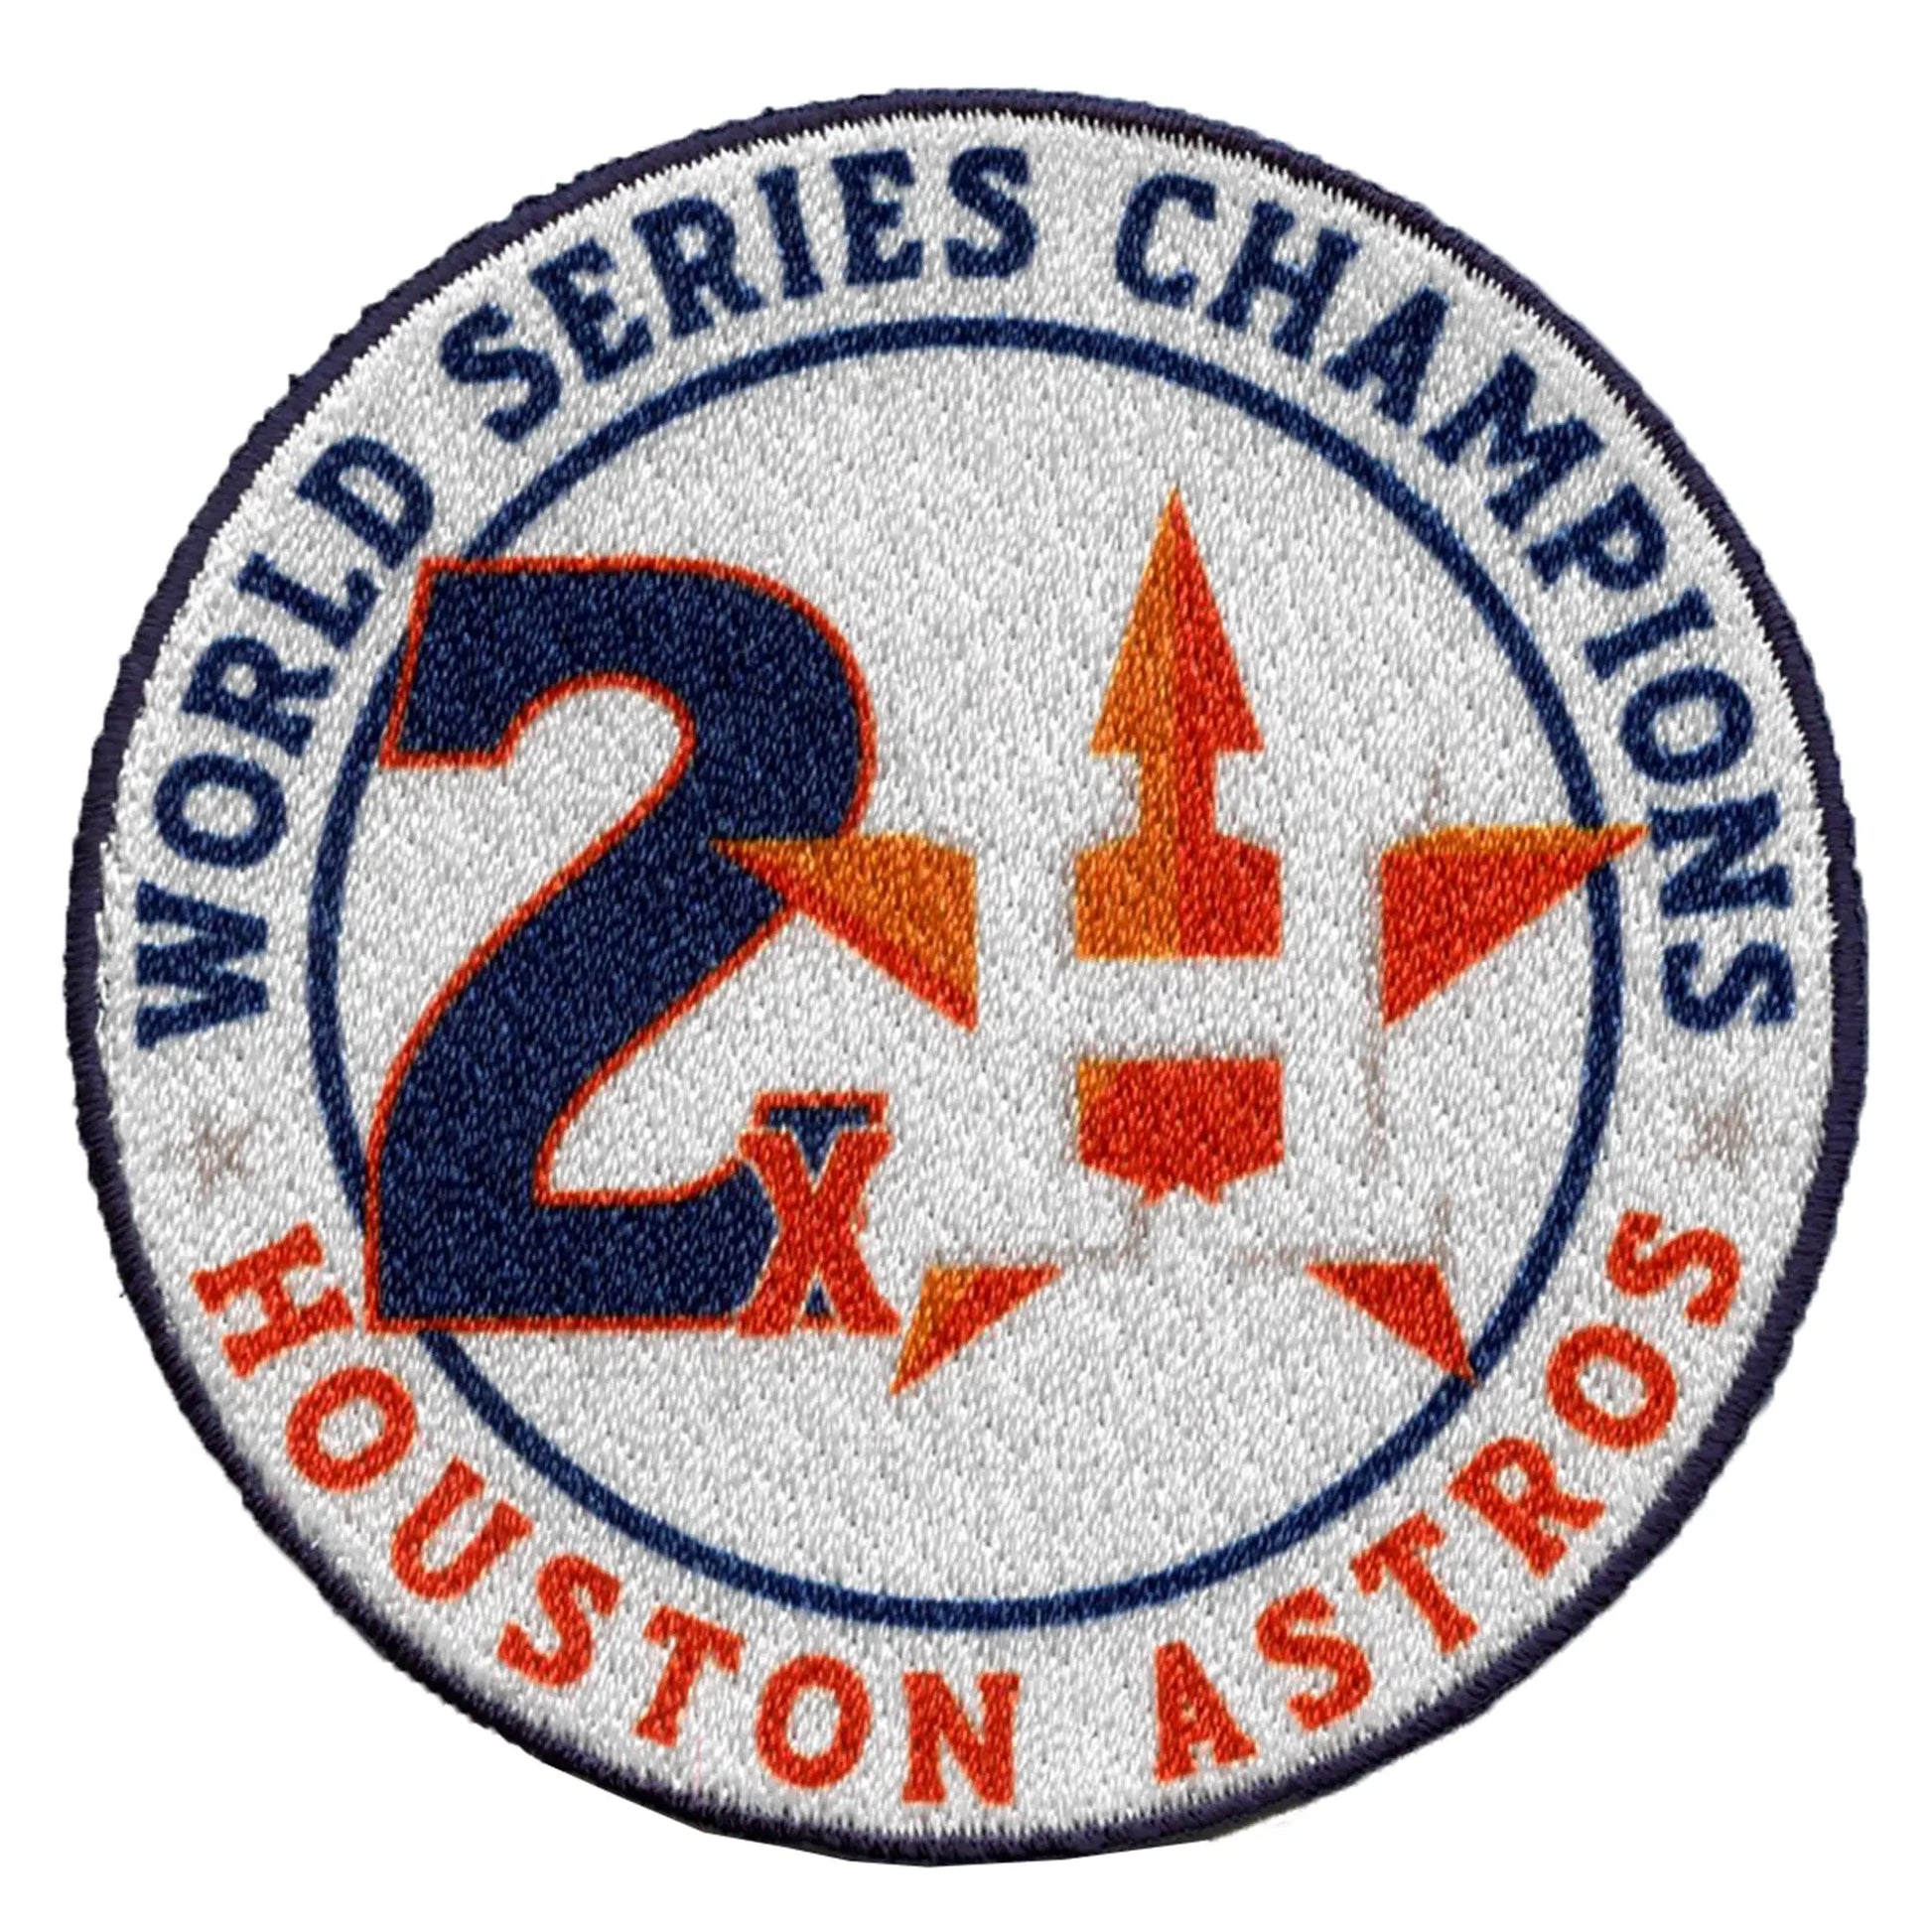 Astros Mickey Mouse Houston Astros 2022 World Series Champions